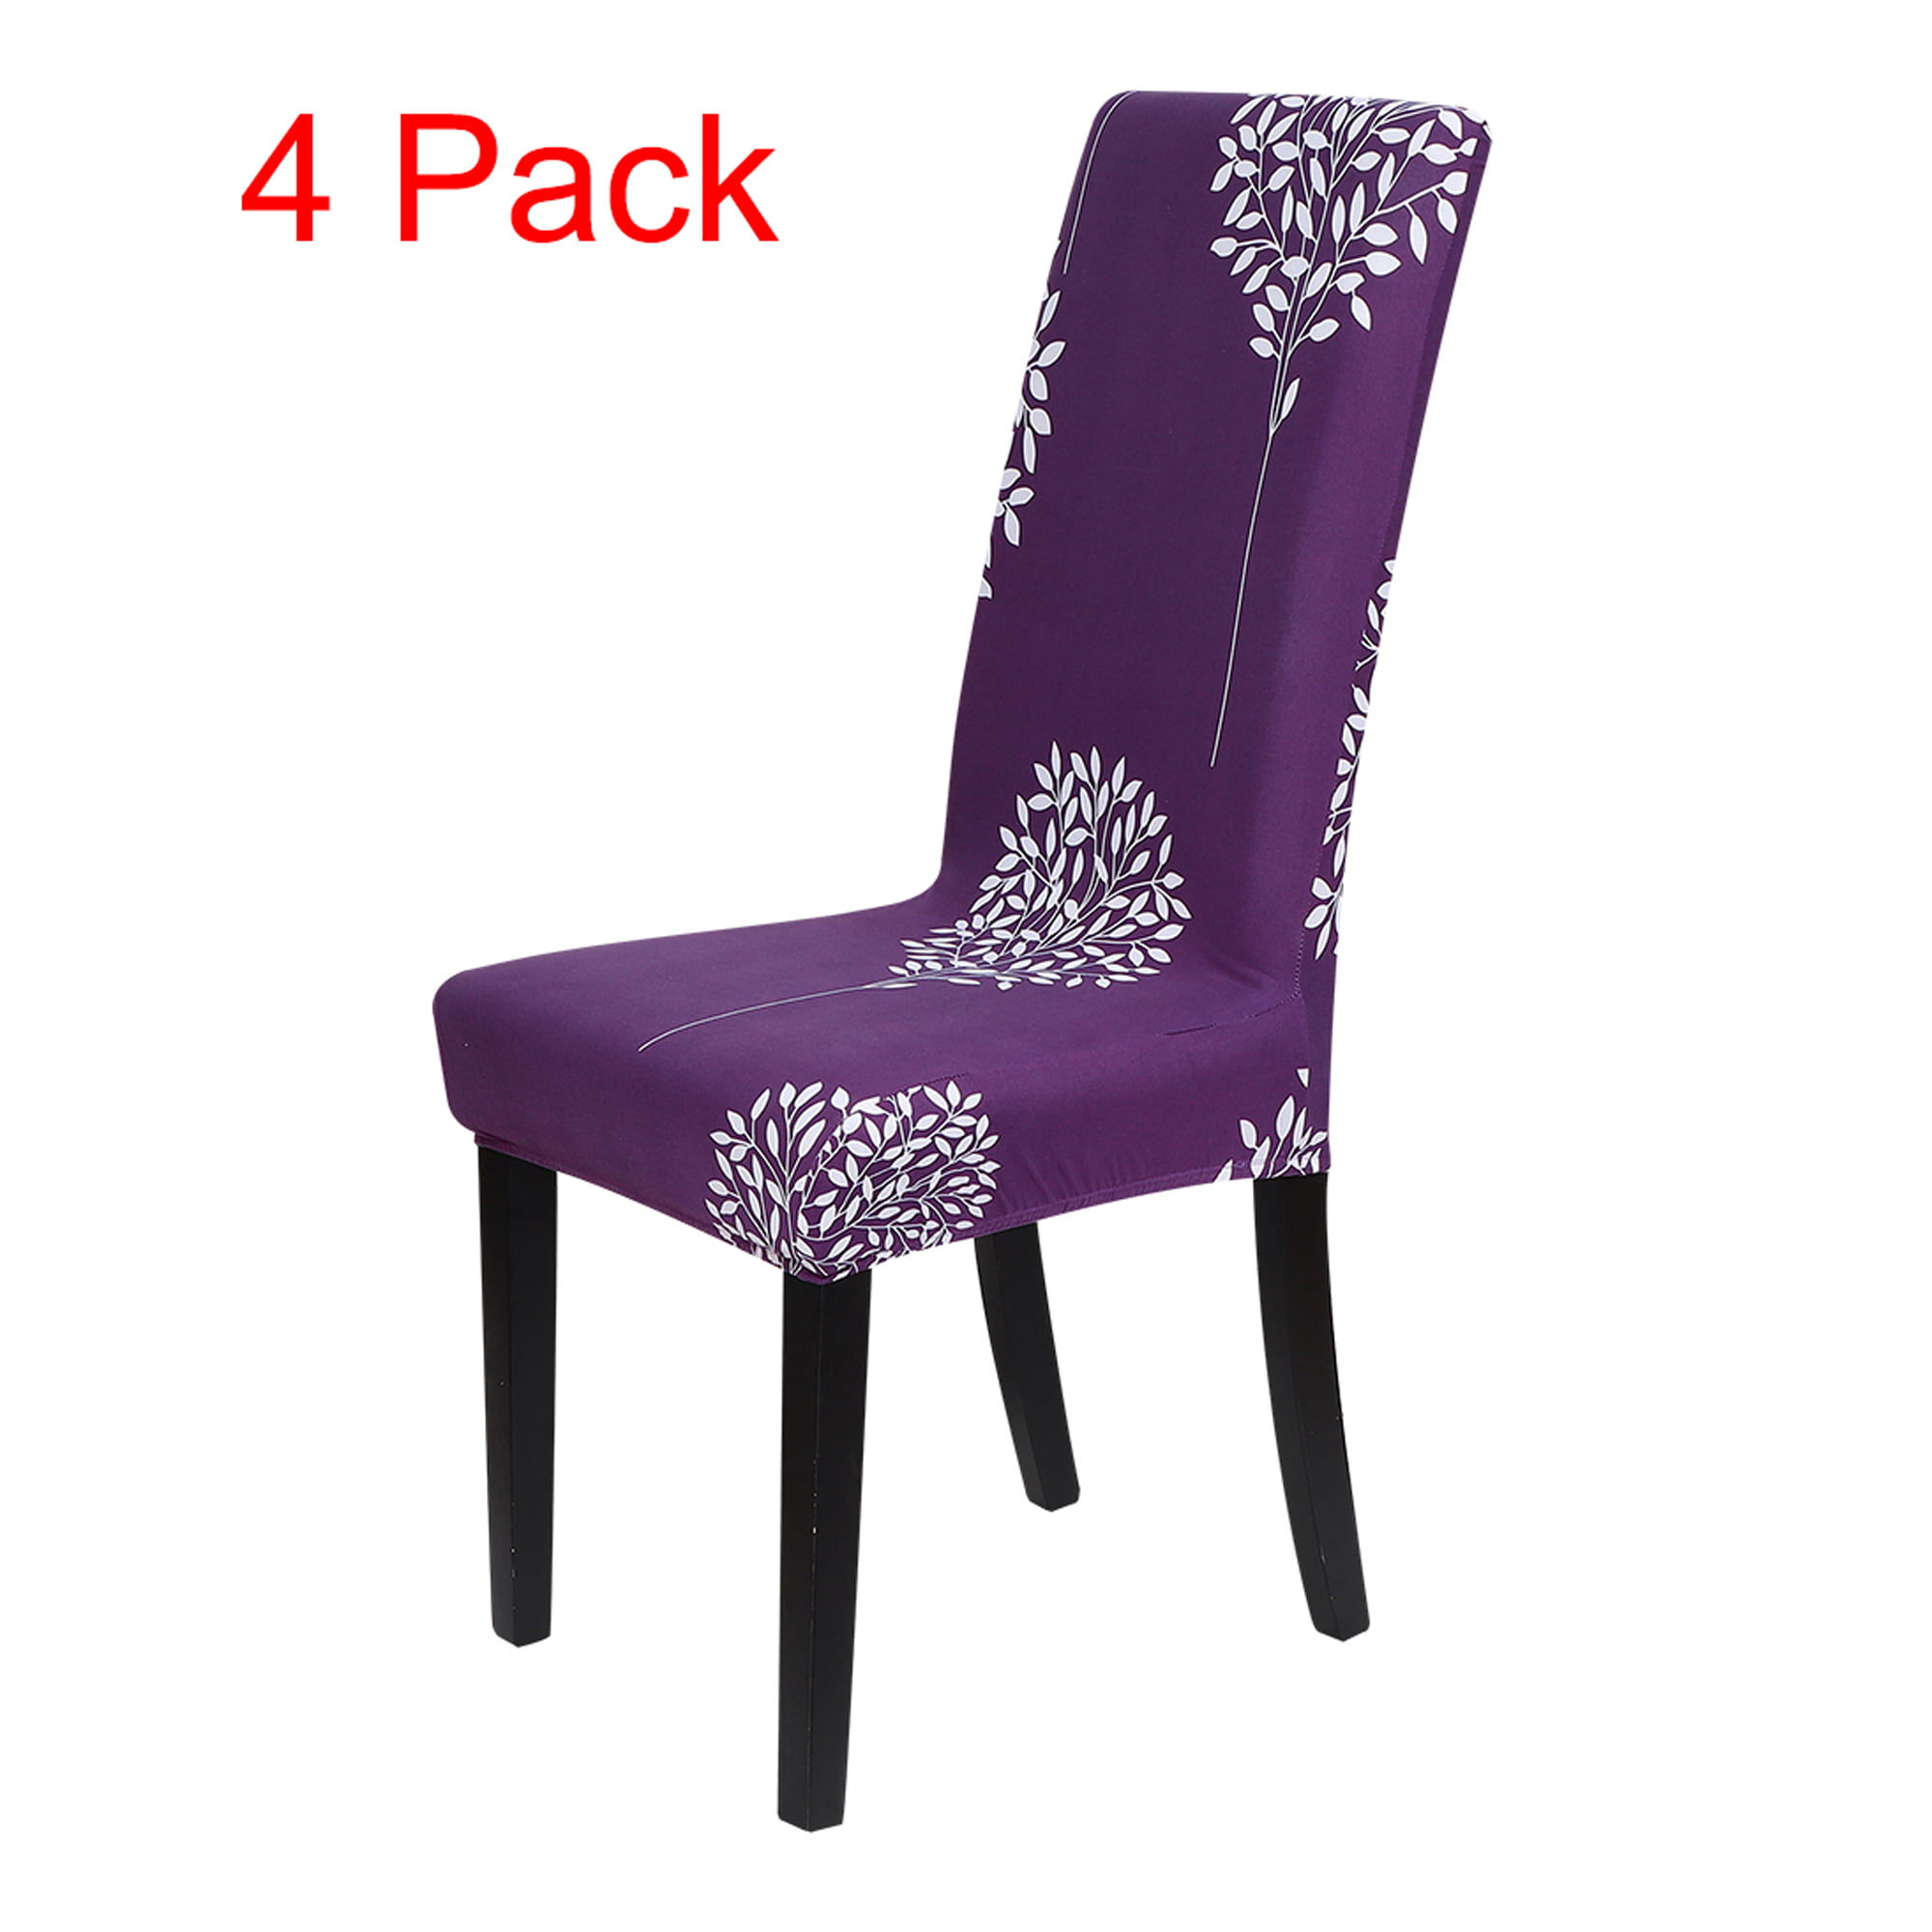 Piccocasa 4 Piece Spandex Dining Room Chair Covers